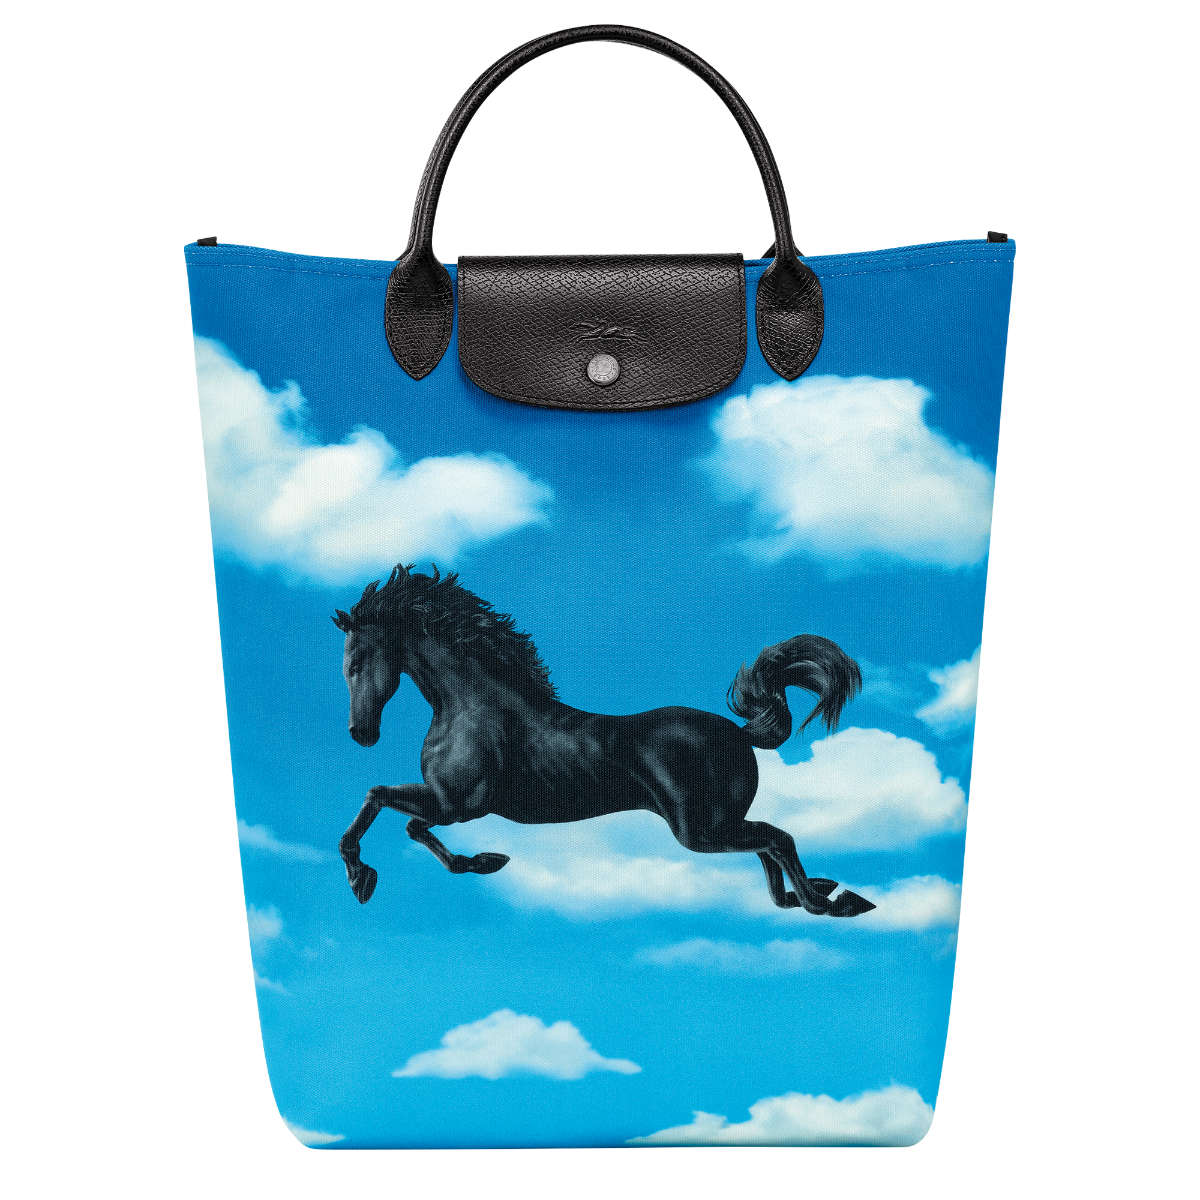 Longchamp X Toiletpaper: An Optimistic Take On A Well-Loved Icon